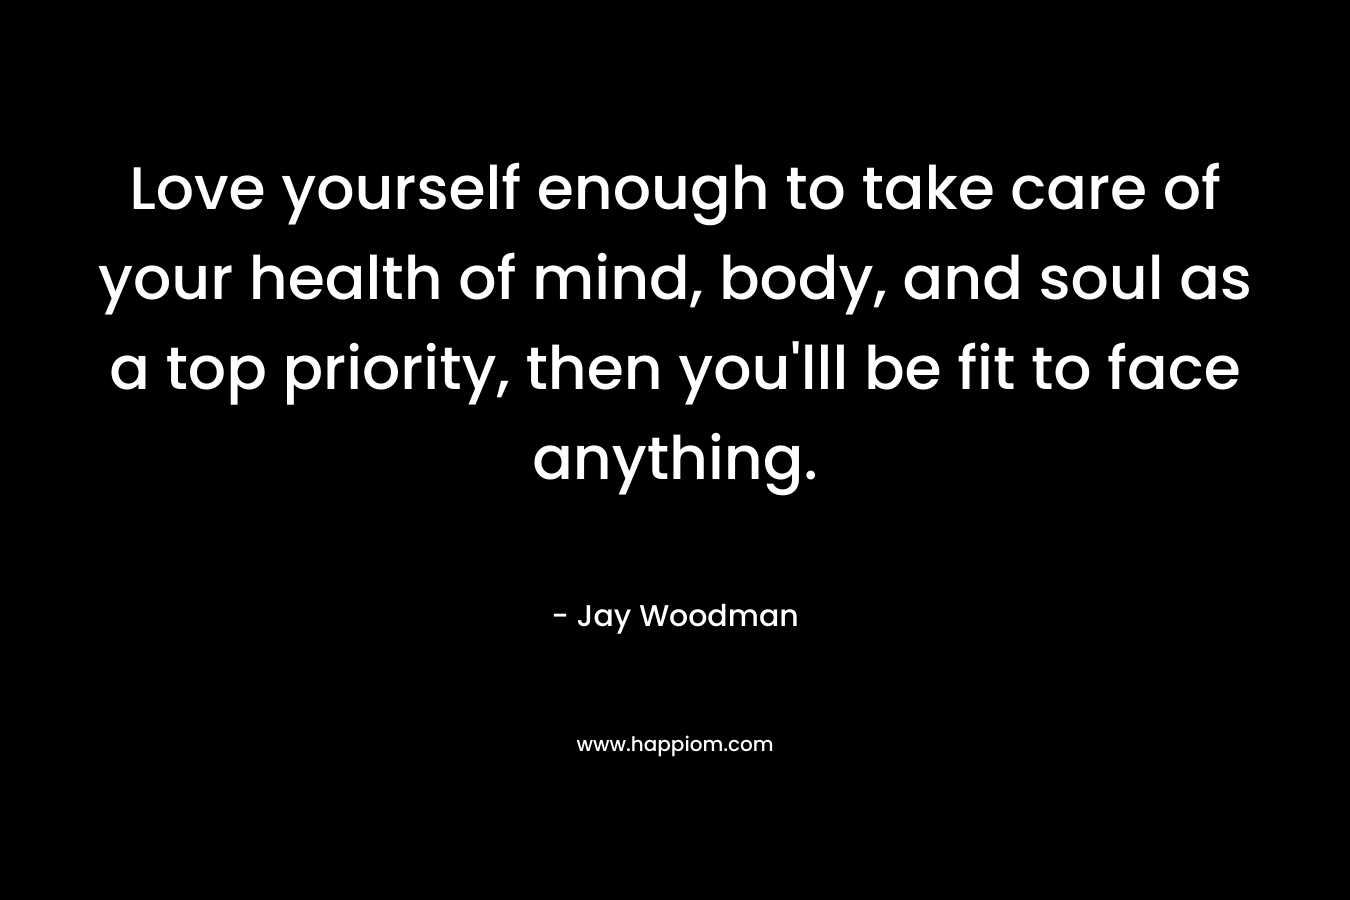 Love yourself enough to take care of your health of mind, body, and soul as a top priority, then you'lll be fit to face anything.